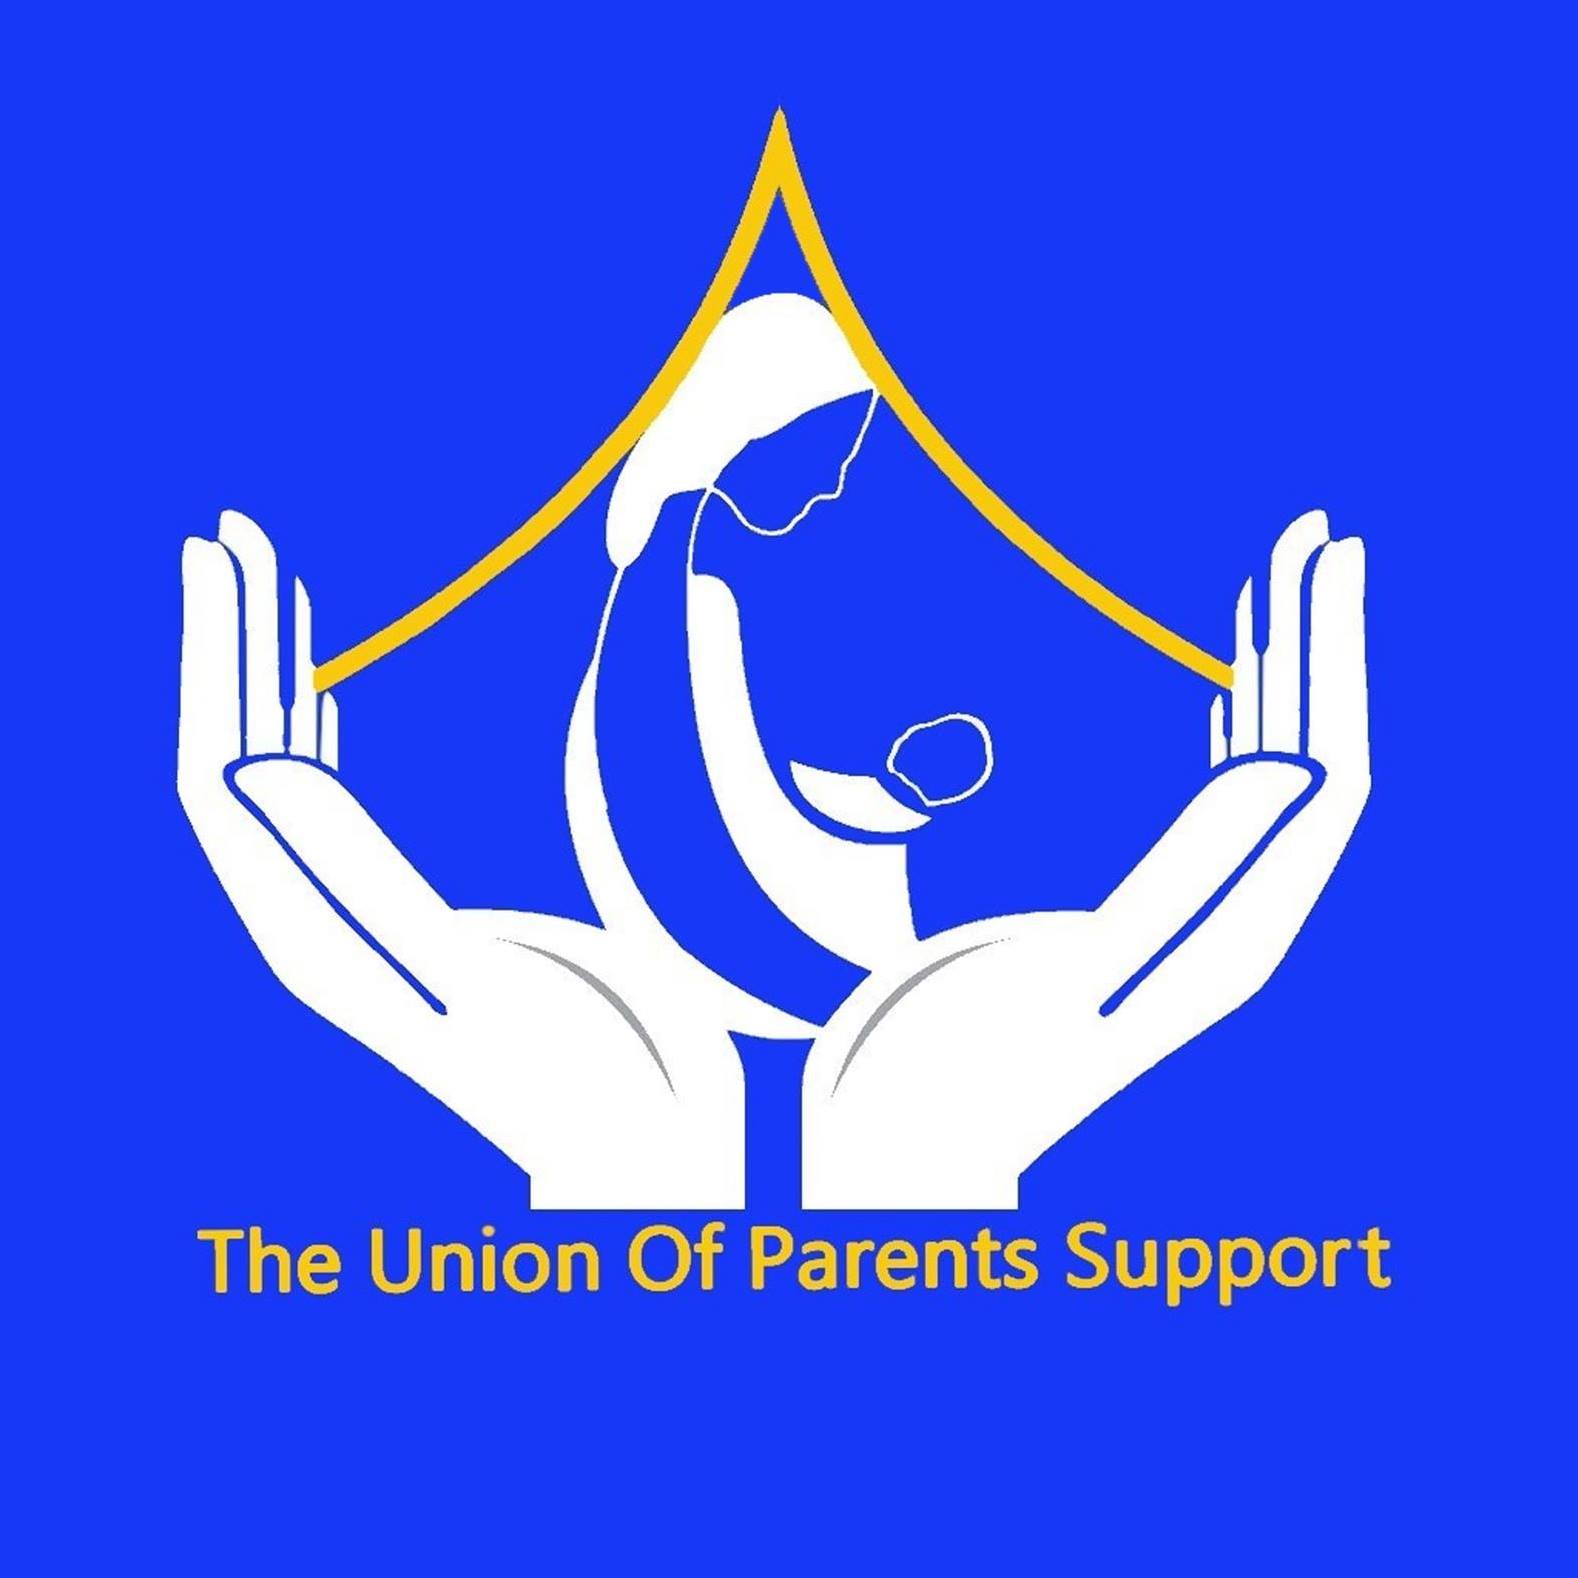 The Union of Parents' Support